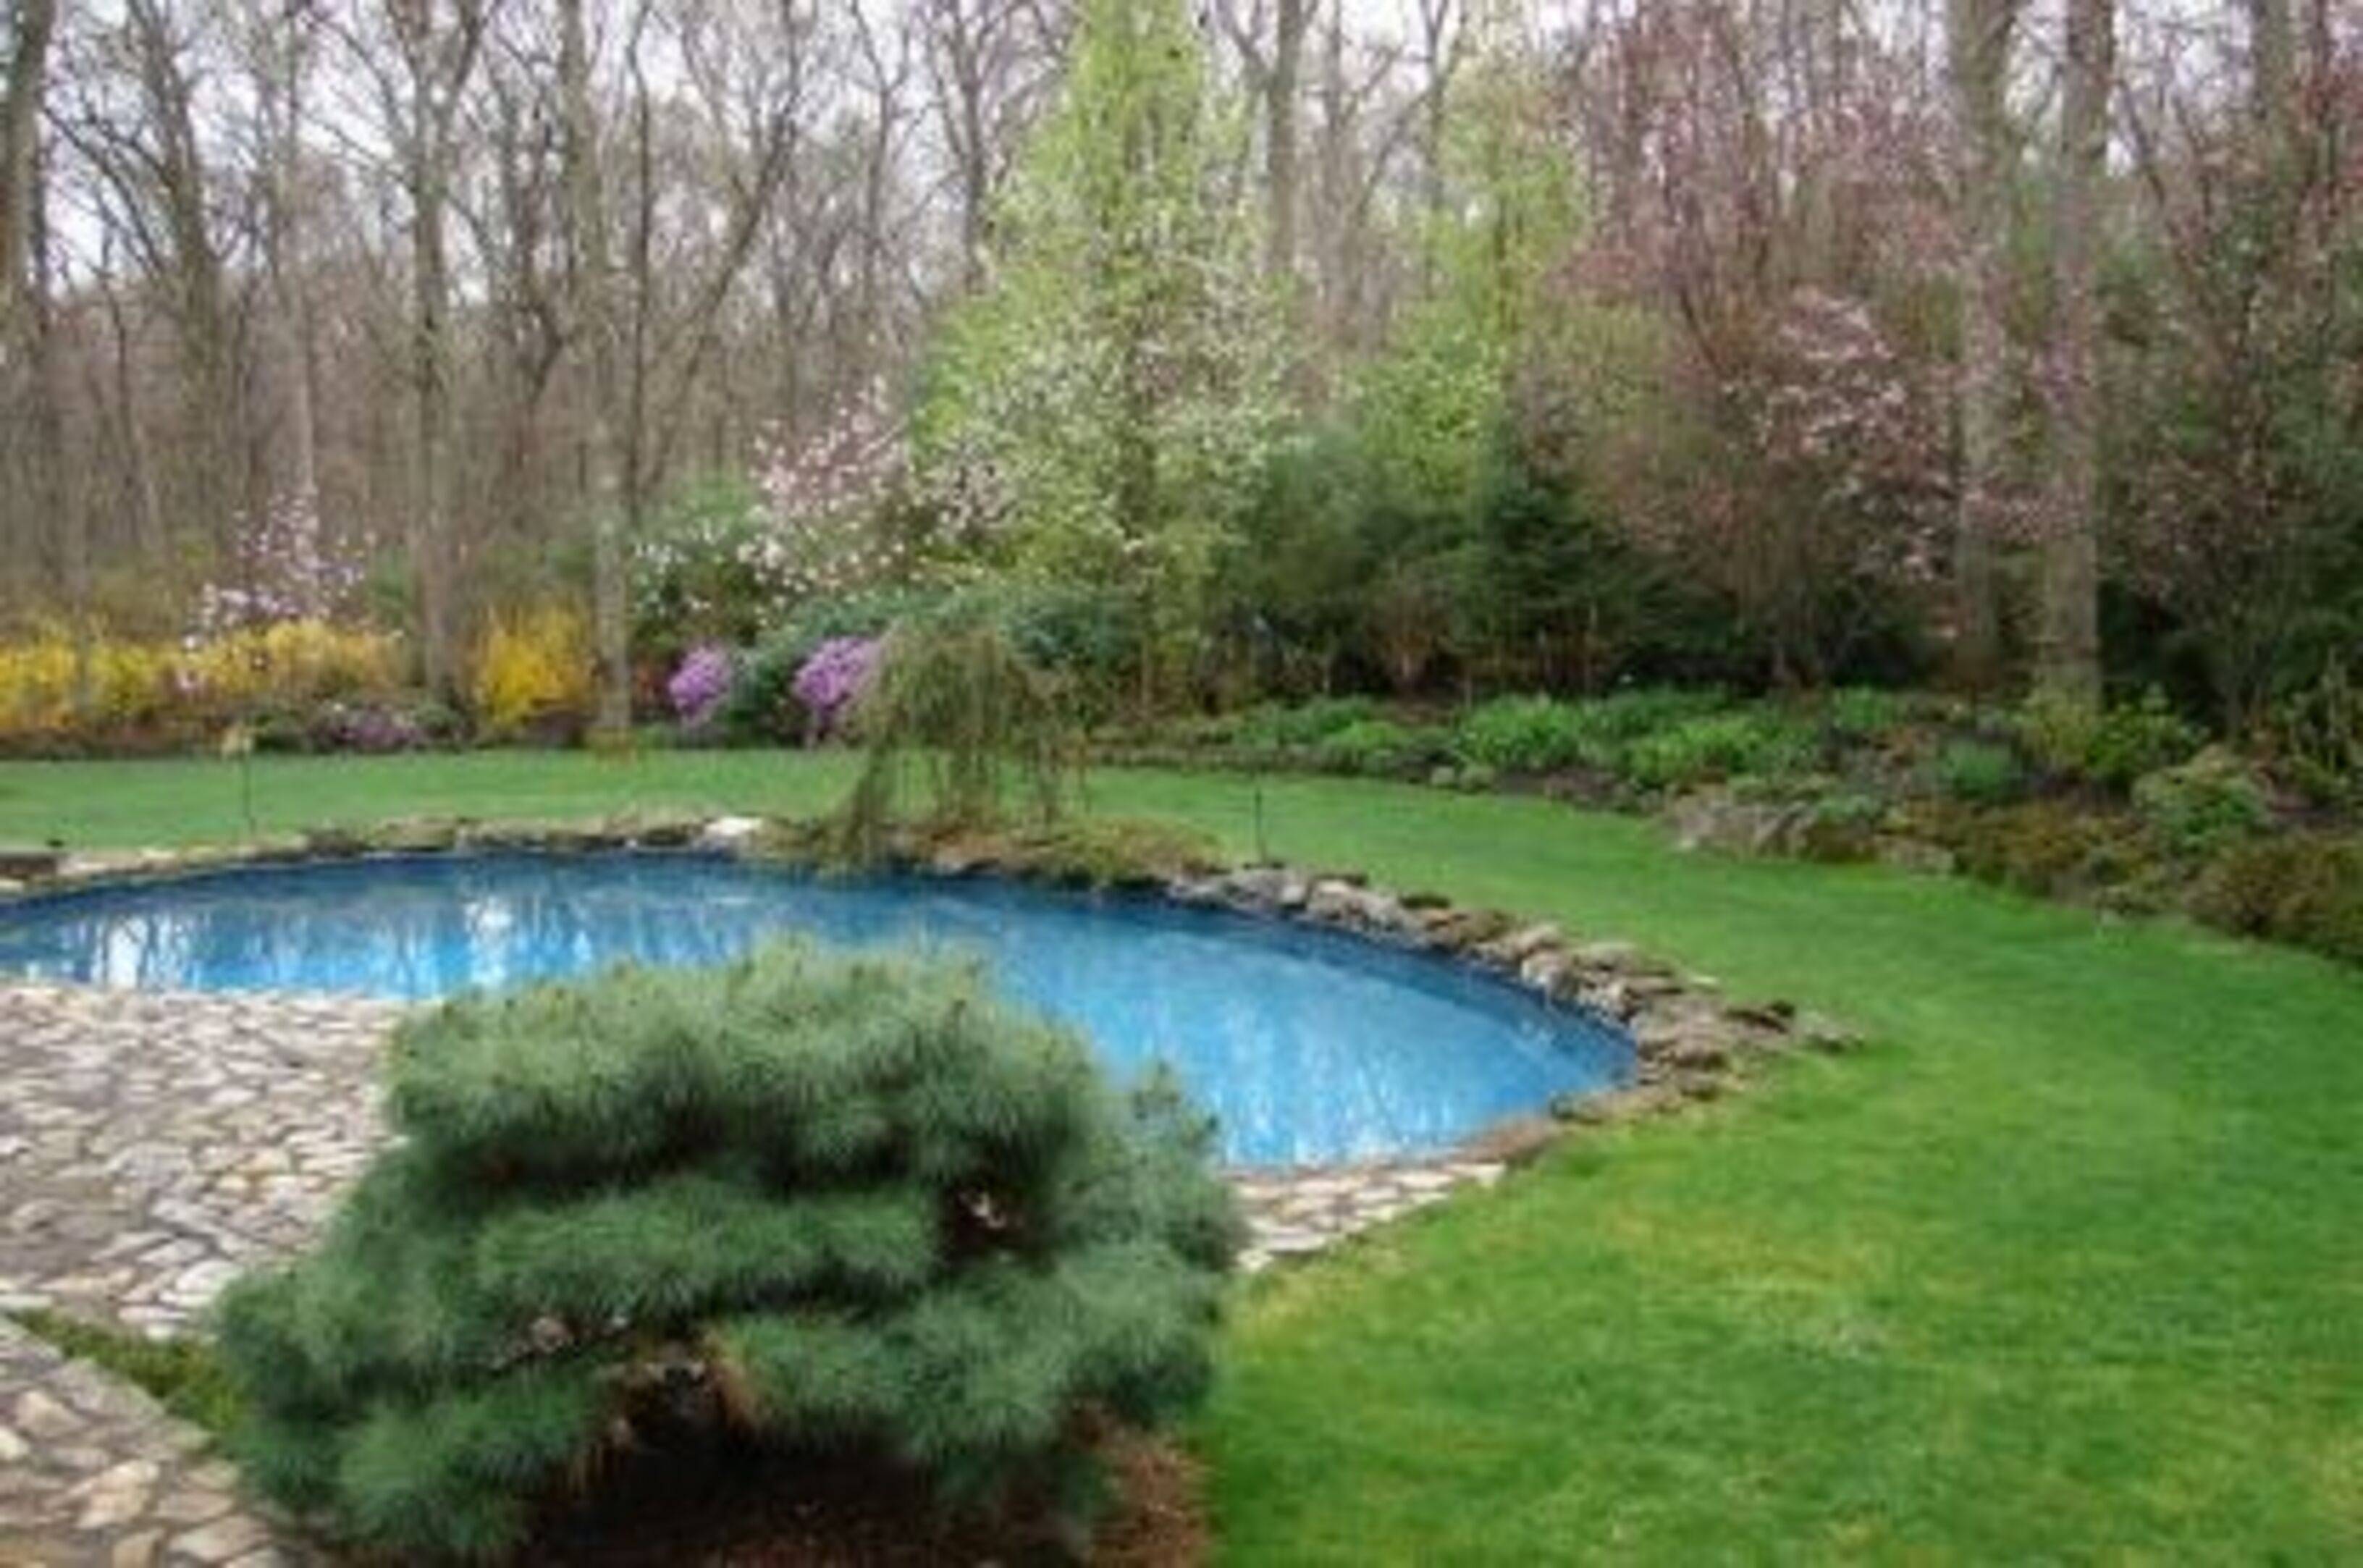 Southampton 4 Bdrms. Serene Setting With Heated Pool